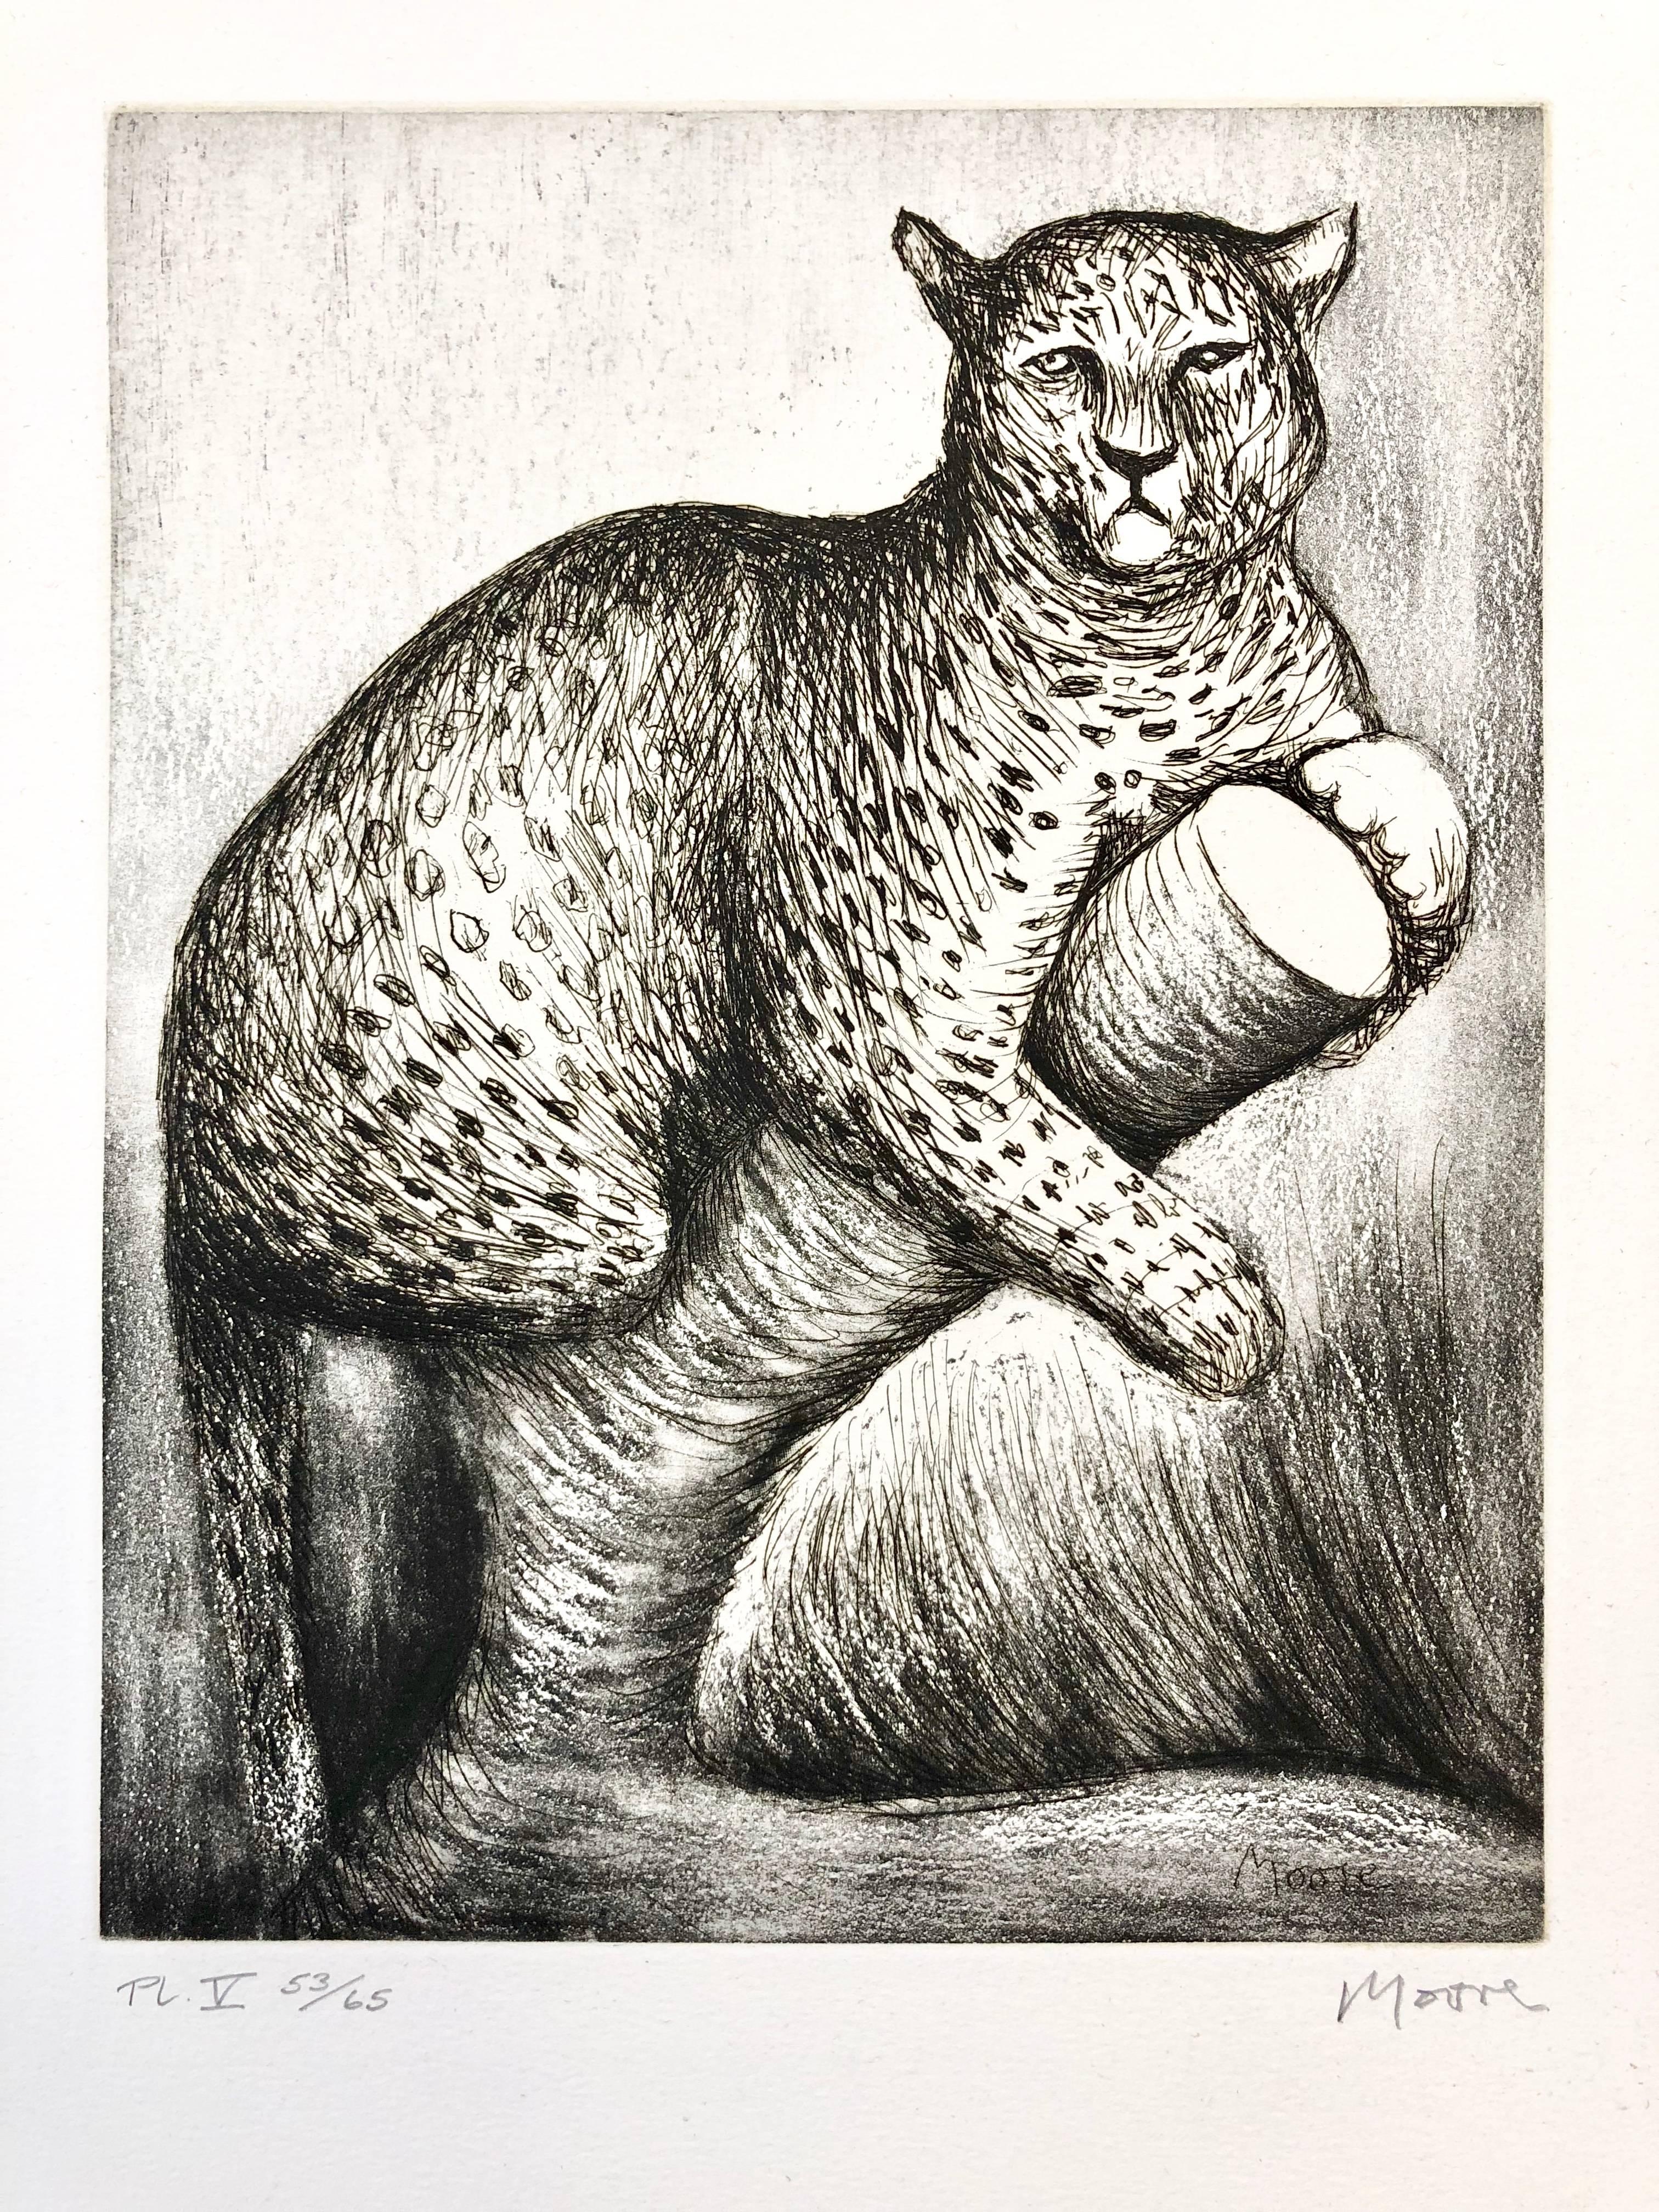 This piece is an original etching, aquatint and roulette by Henry Moore, created in 1981. It is from Moore's album of 15 original etchings, entitled 